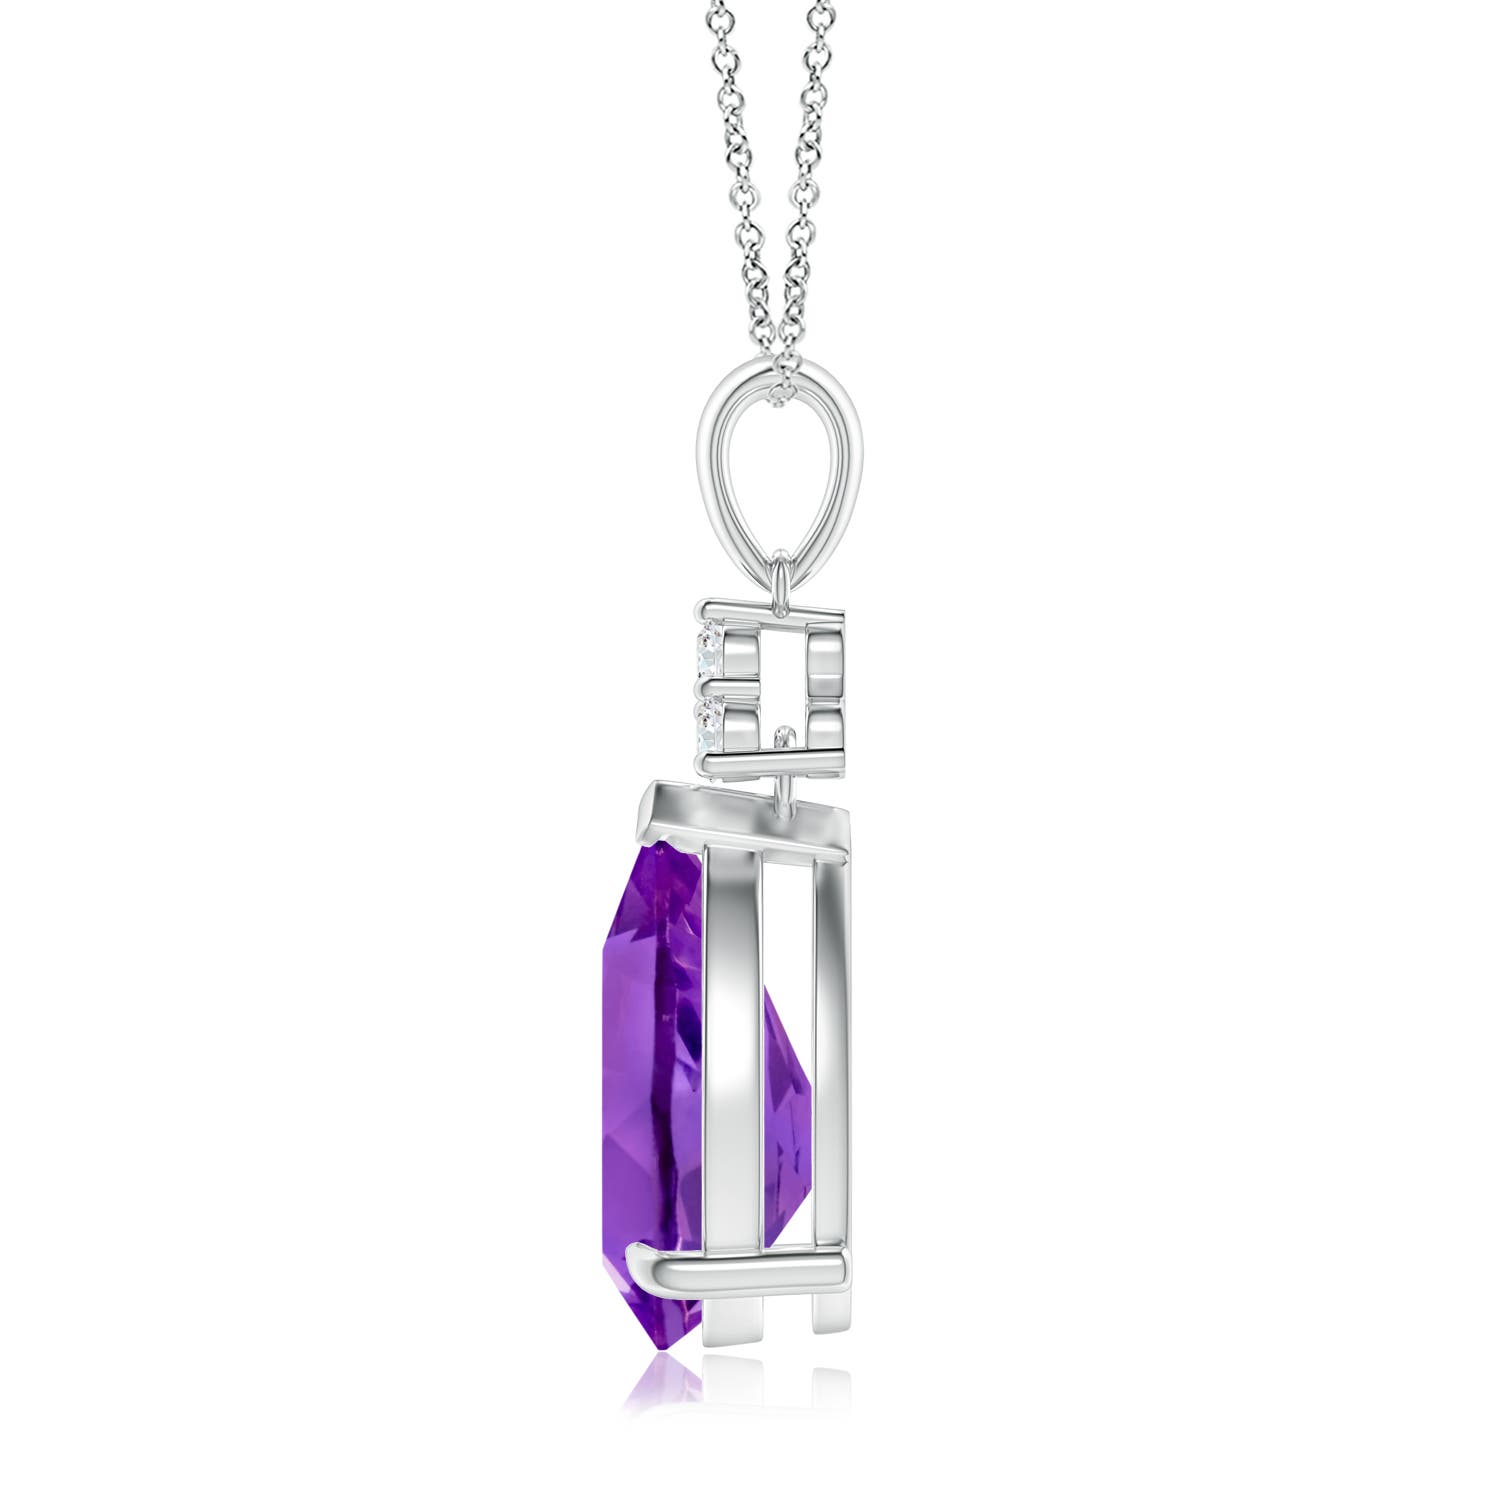 AAA - Amethyst / 2.71 CT / 14 KT White Gold